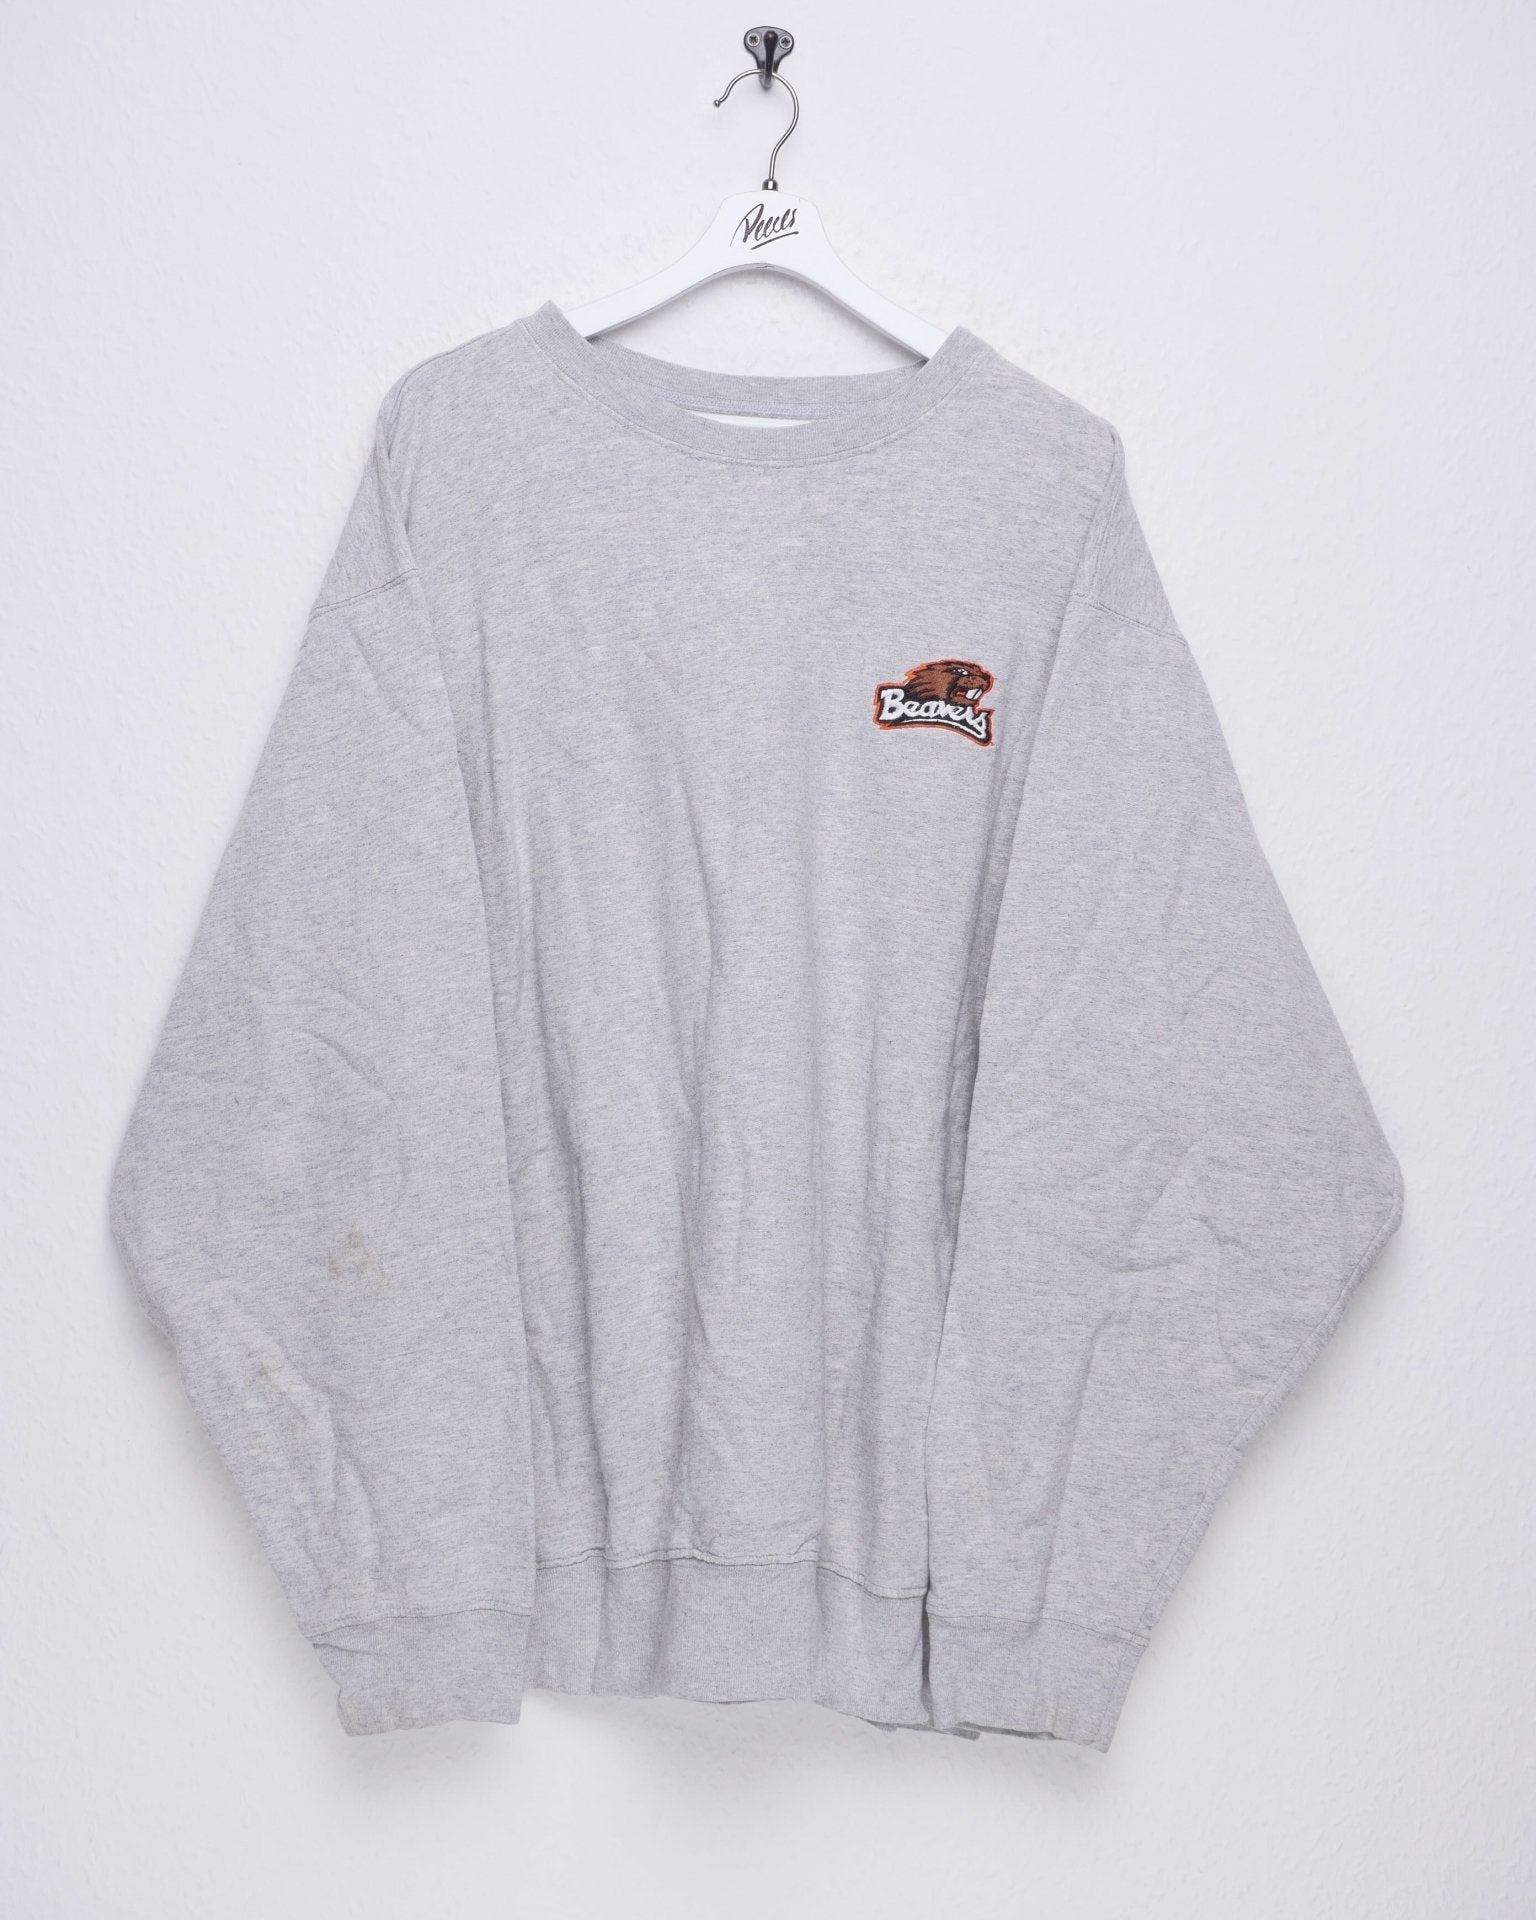 Oregon State Beavers embroidered Logo grey Sweater - Peeces